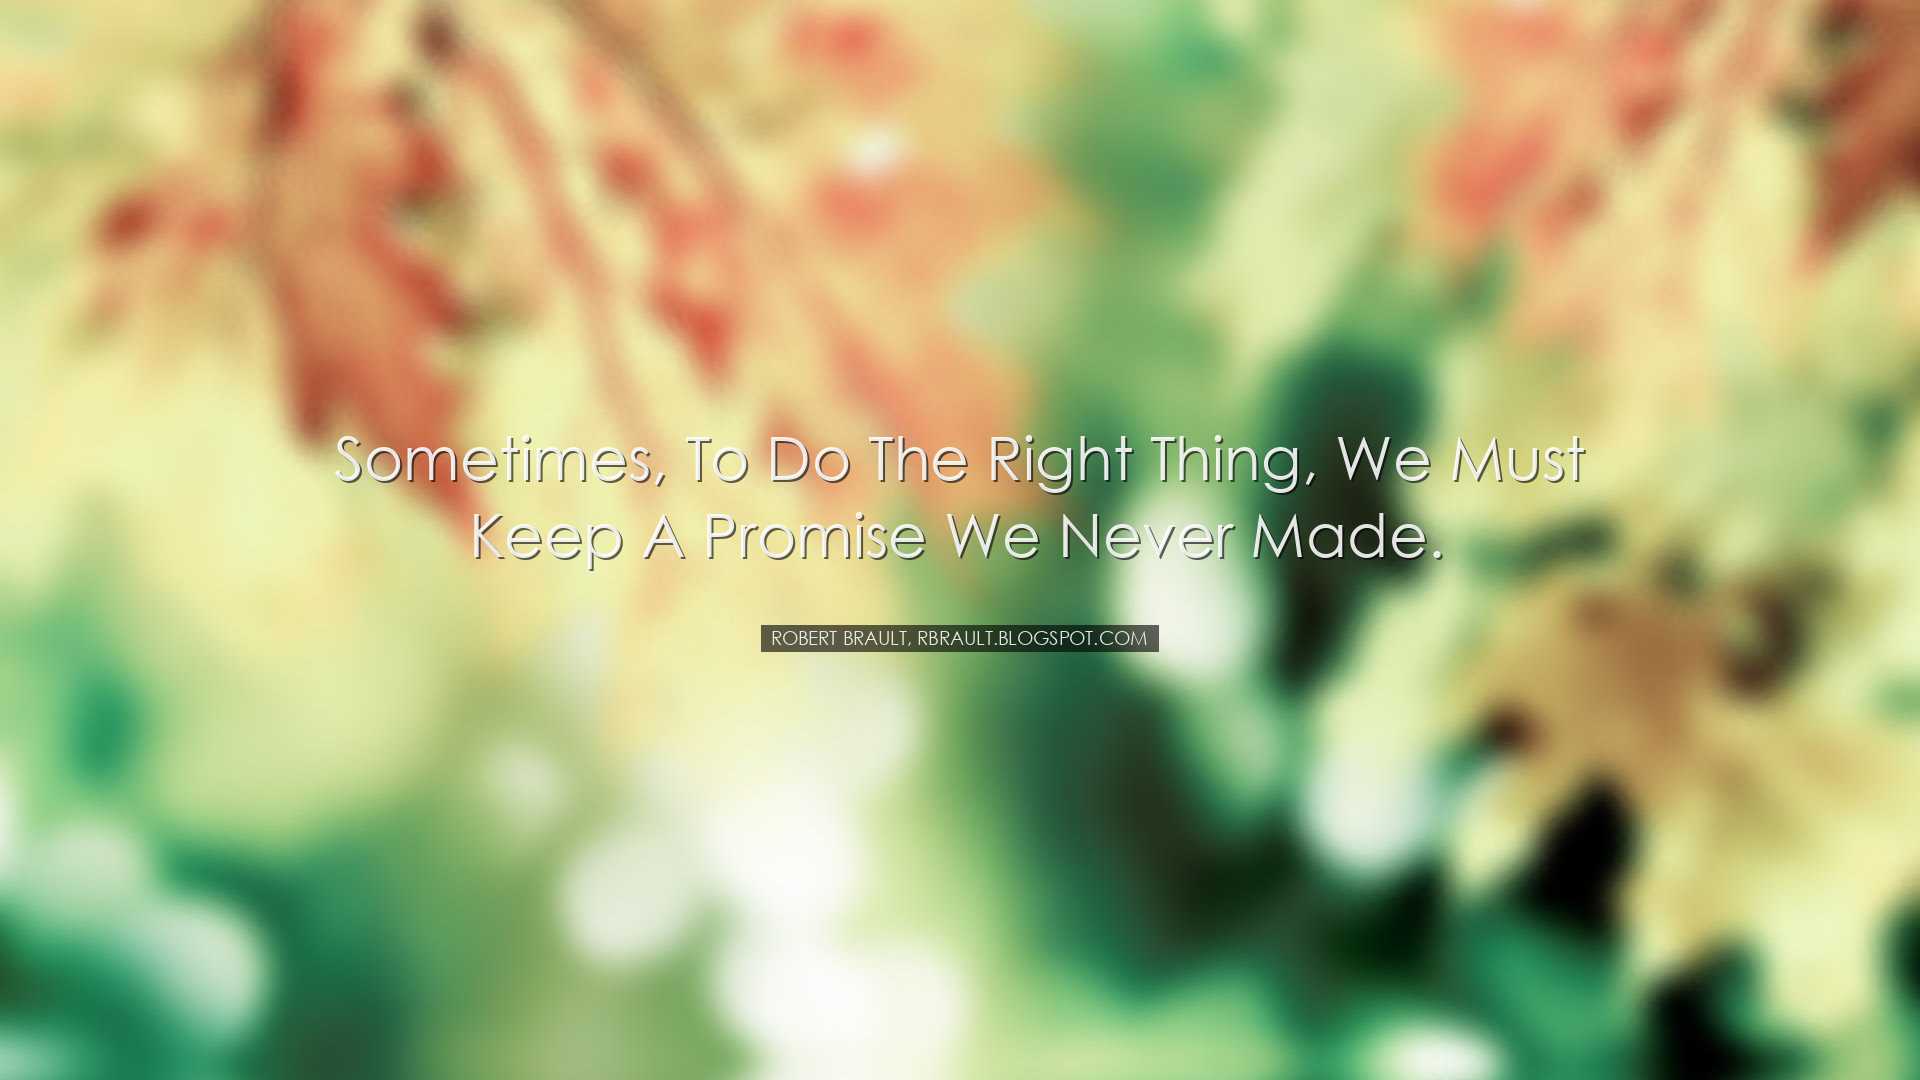 Sometimes, to do the right thing, we must keep a promise we never